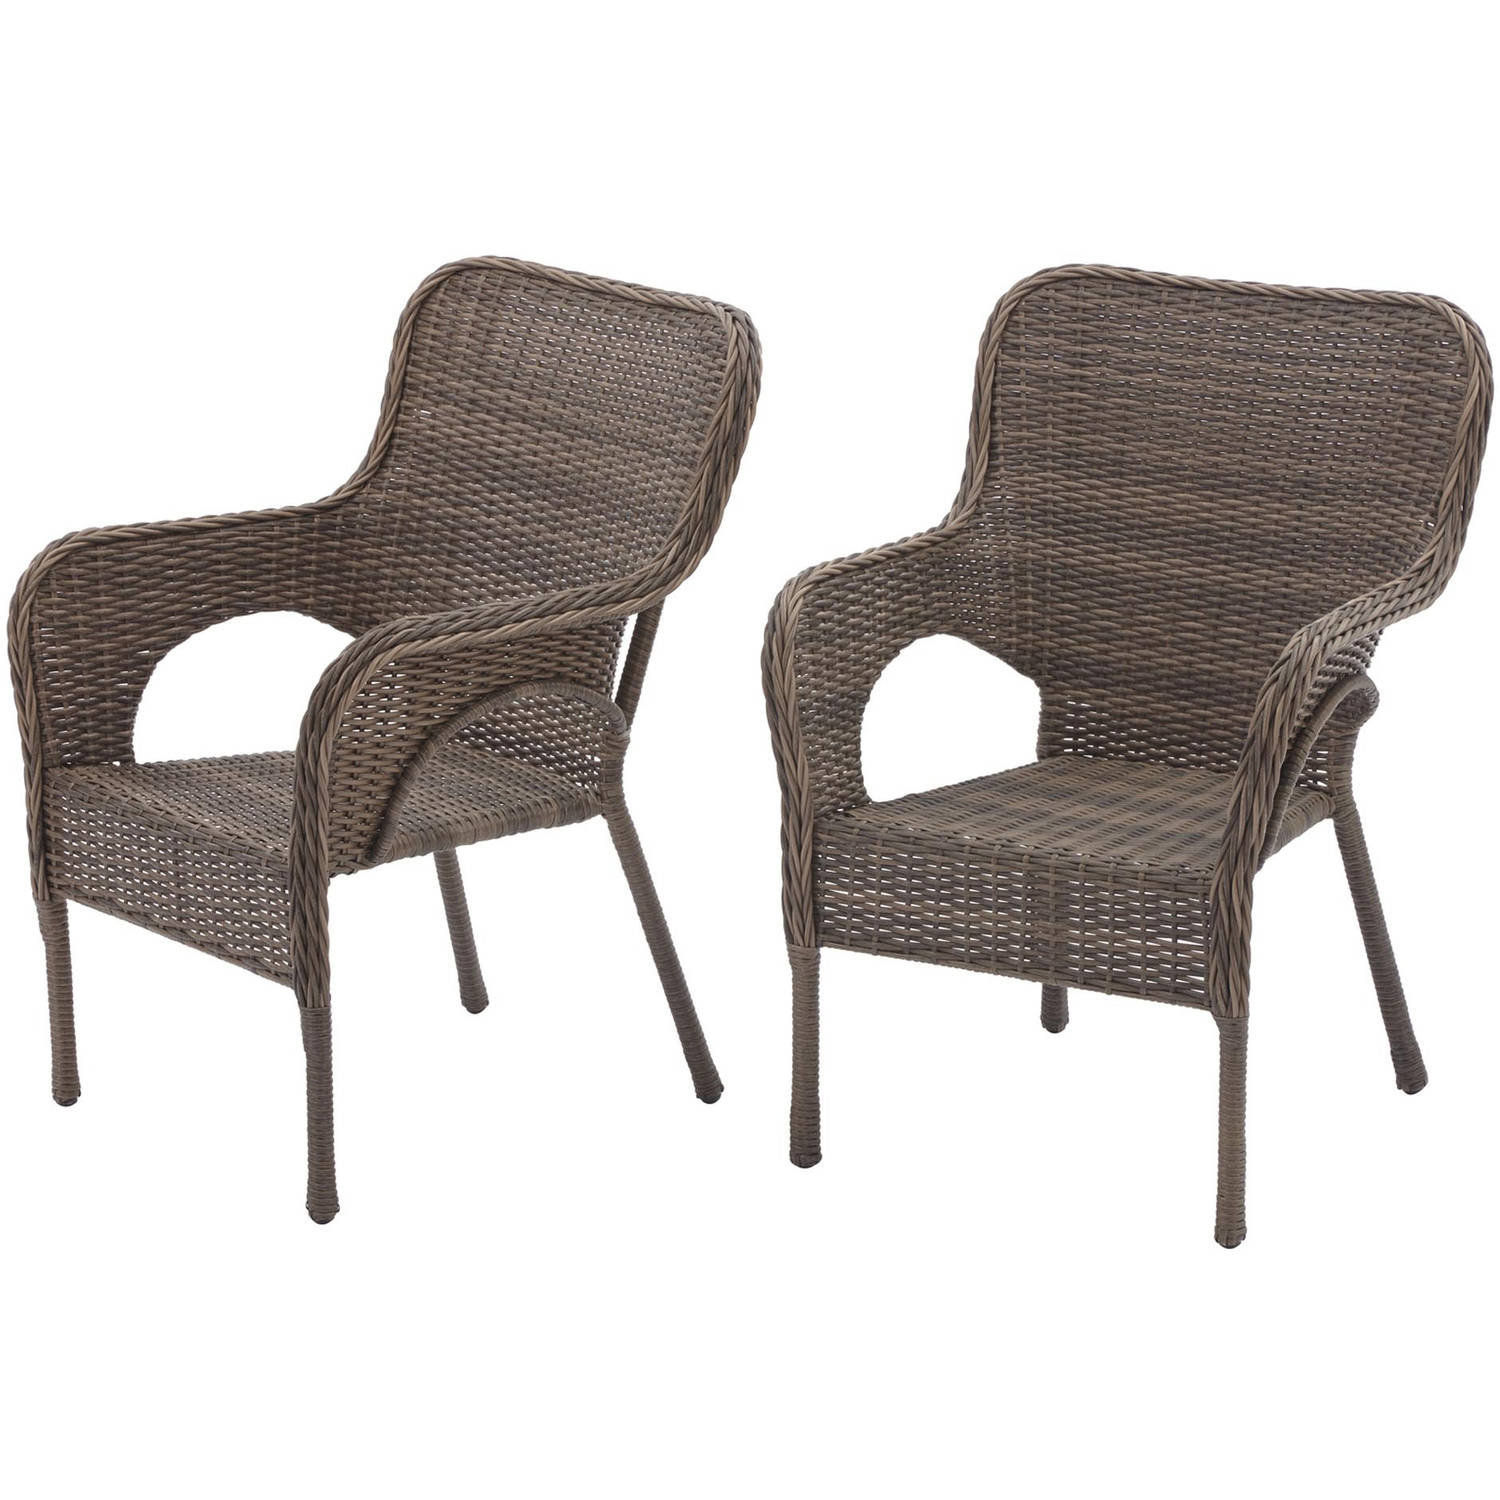 outdoor chairs better homes and gardens camrose farmhouse mix and match stacking wicker  chairs, set of 2 - SWJVGAE